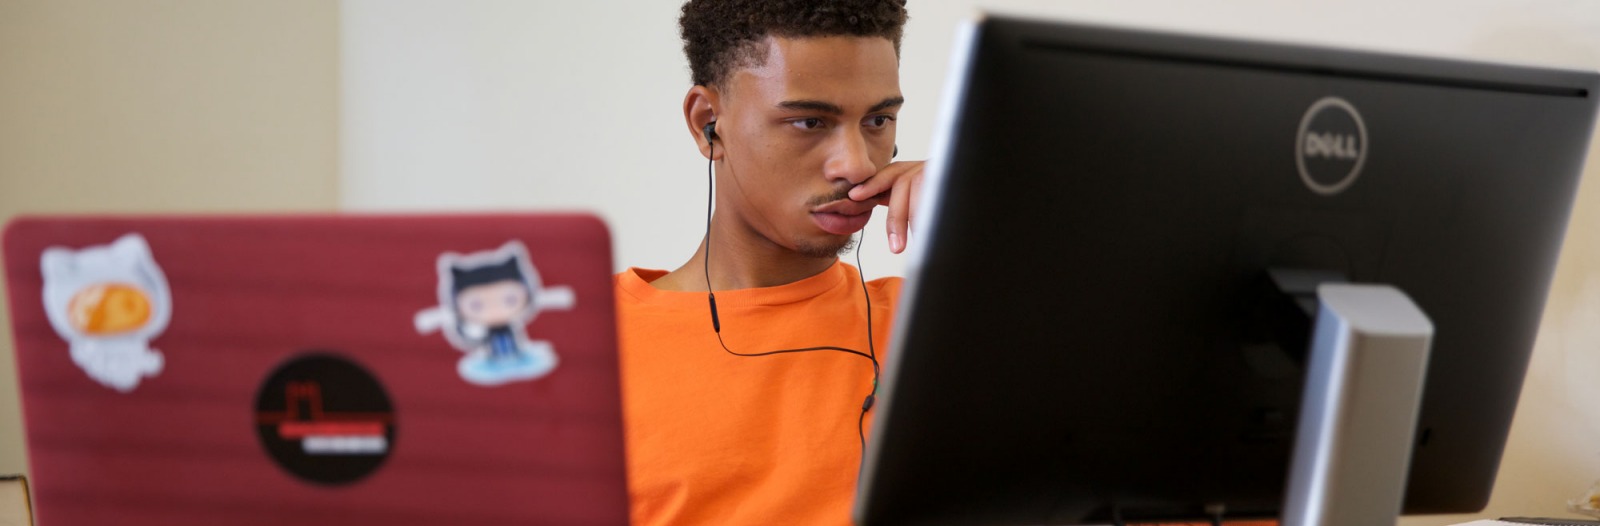 Student working on computer